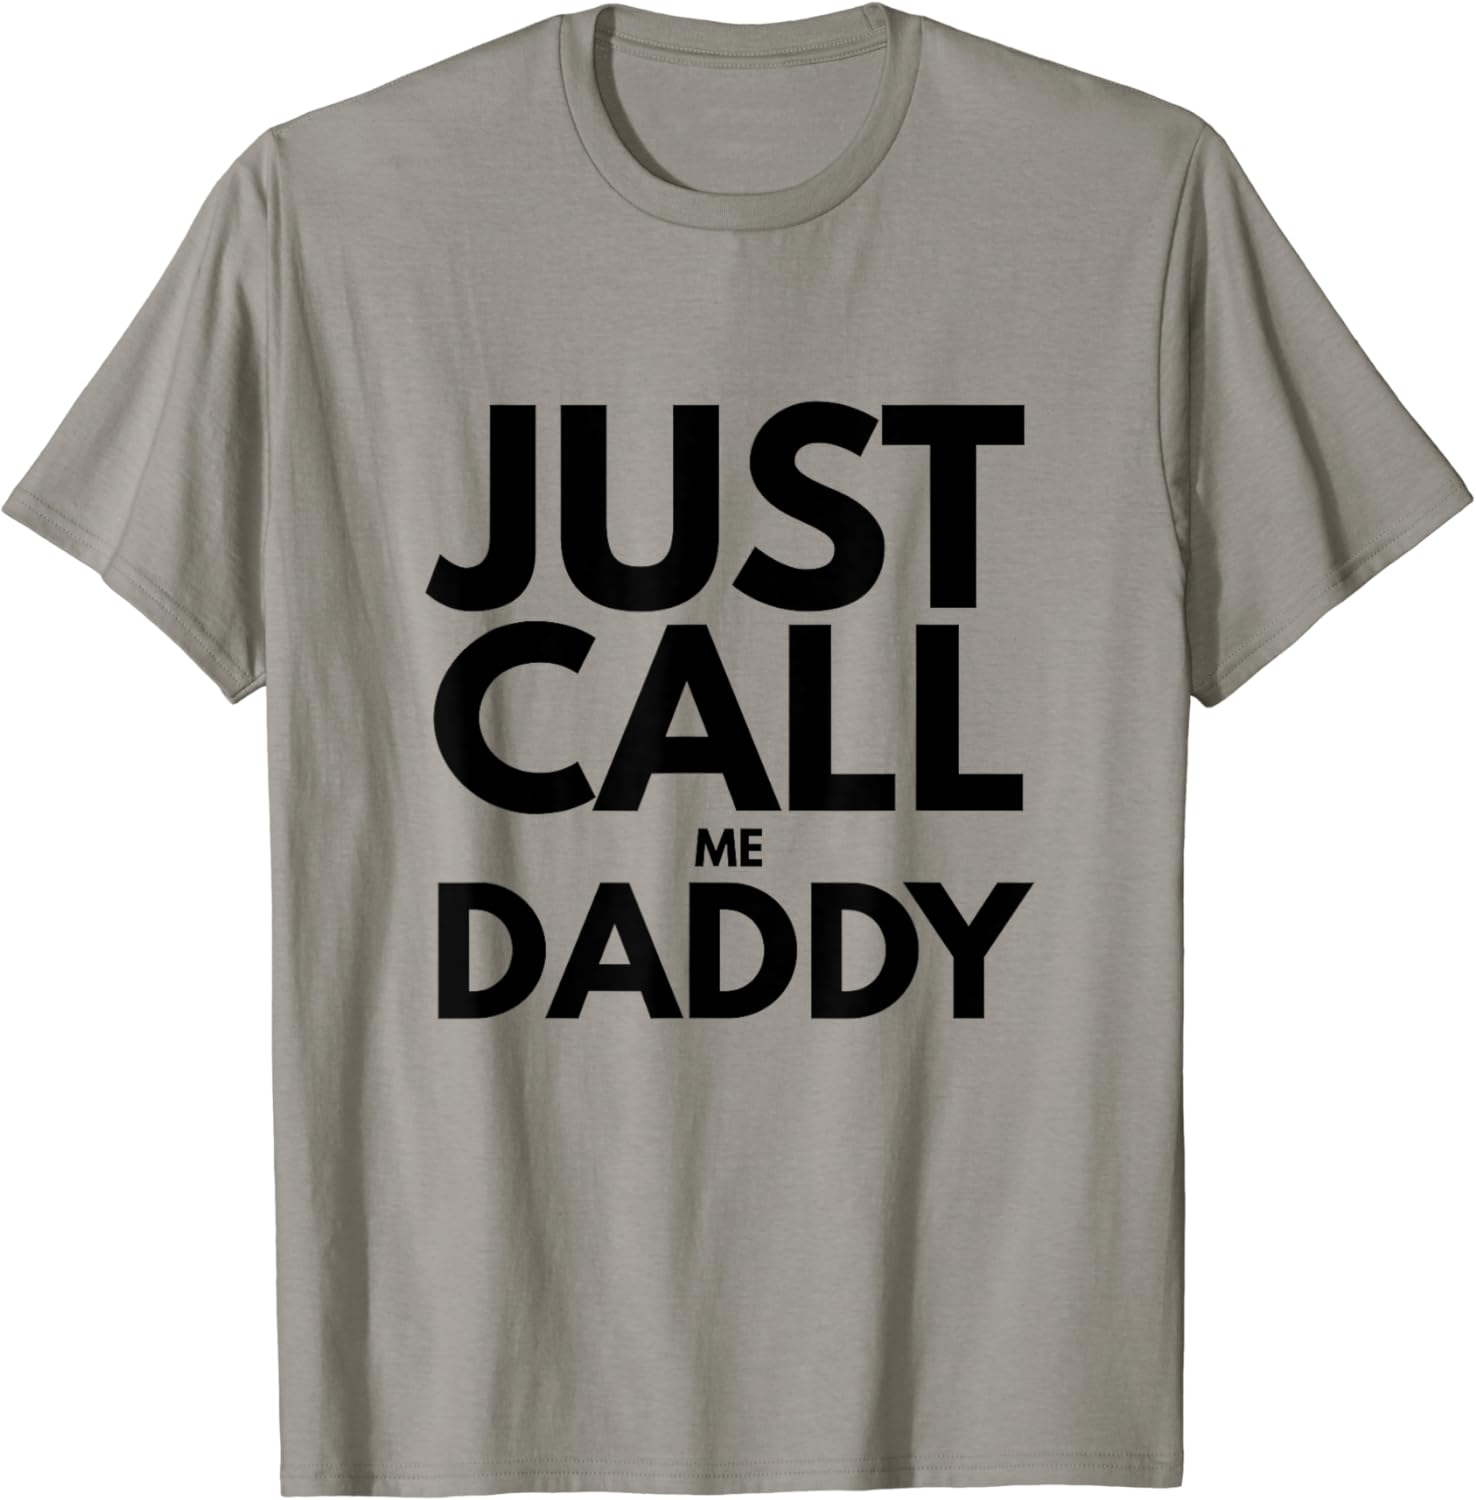 ana kozomara recommends Just Call Me Daddy